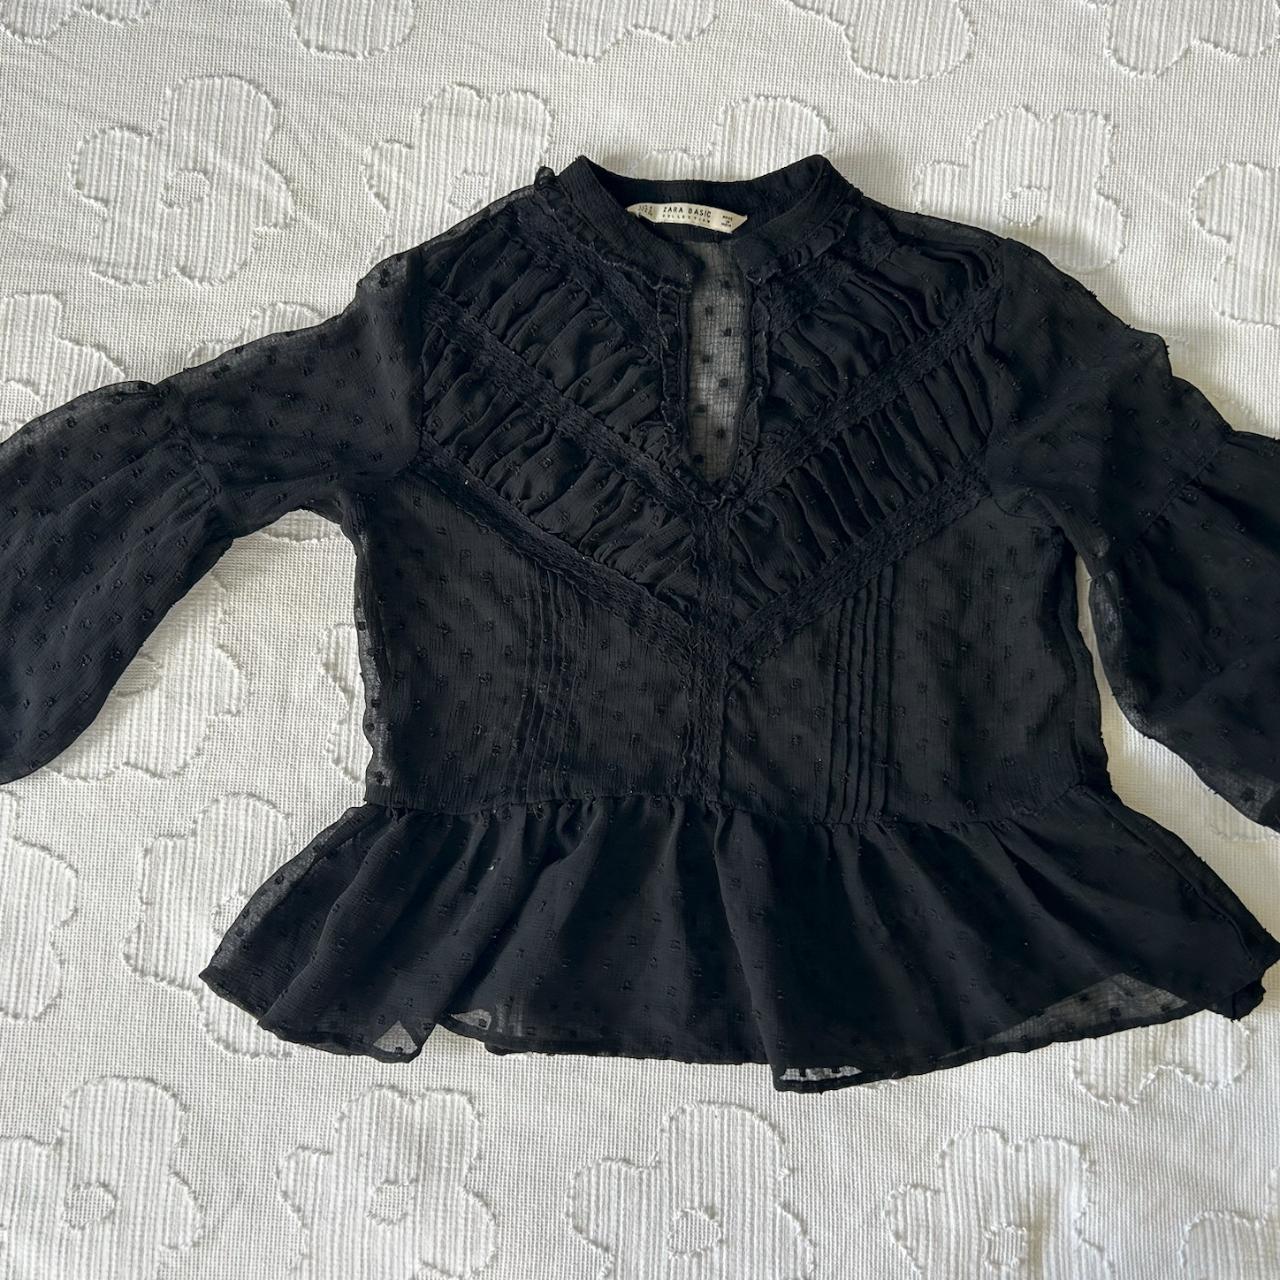 beautiful black blouse with puffed sleeves and... - Depop